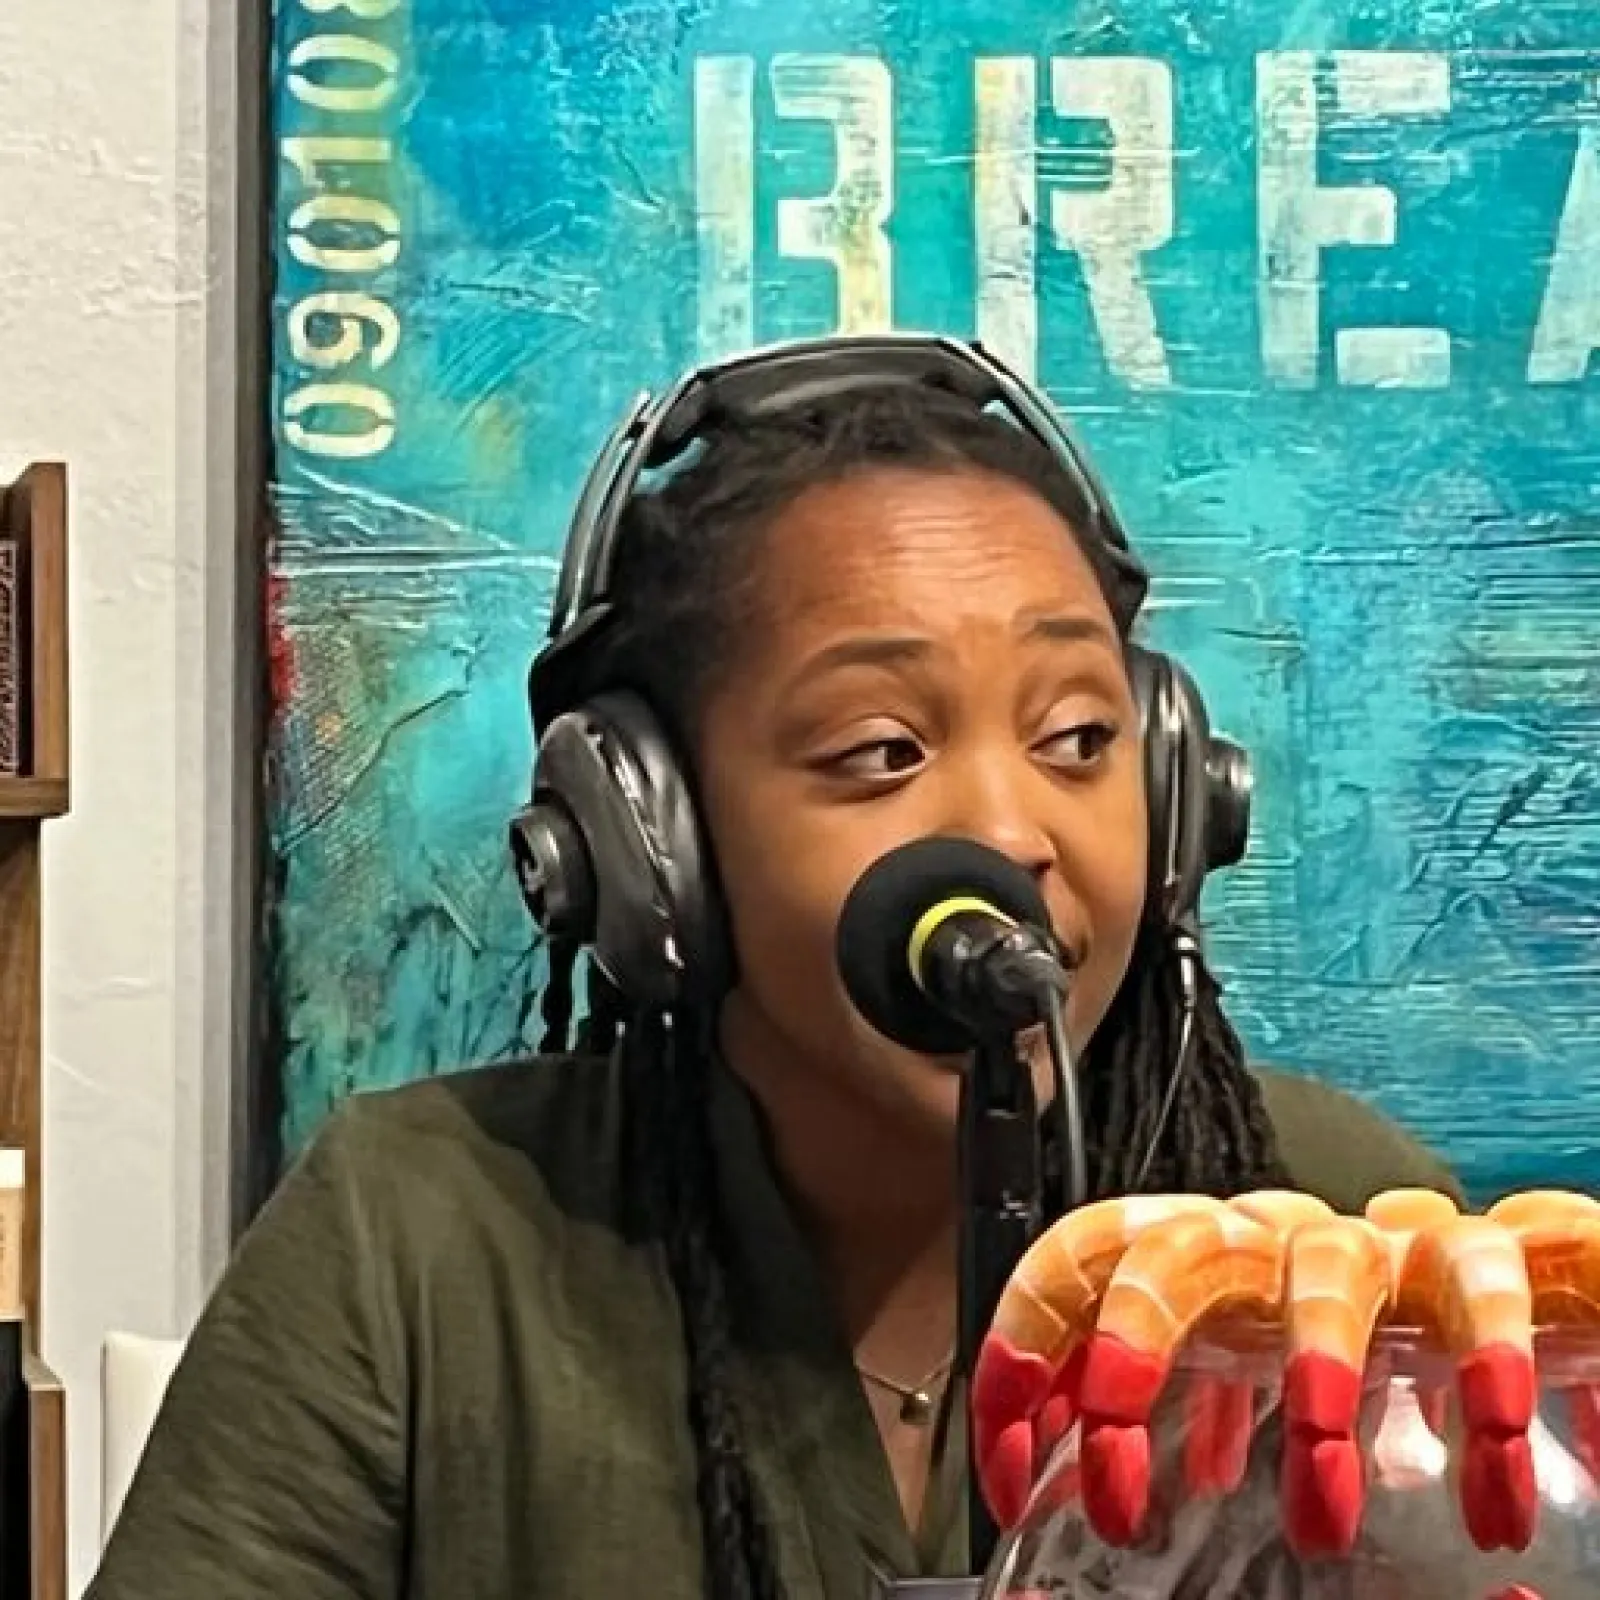 a woman wearing headphones and holding a hot dog